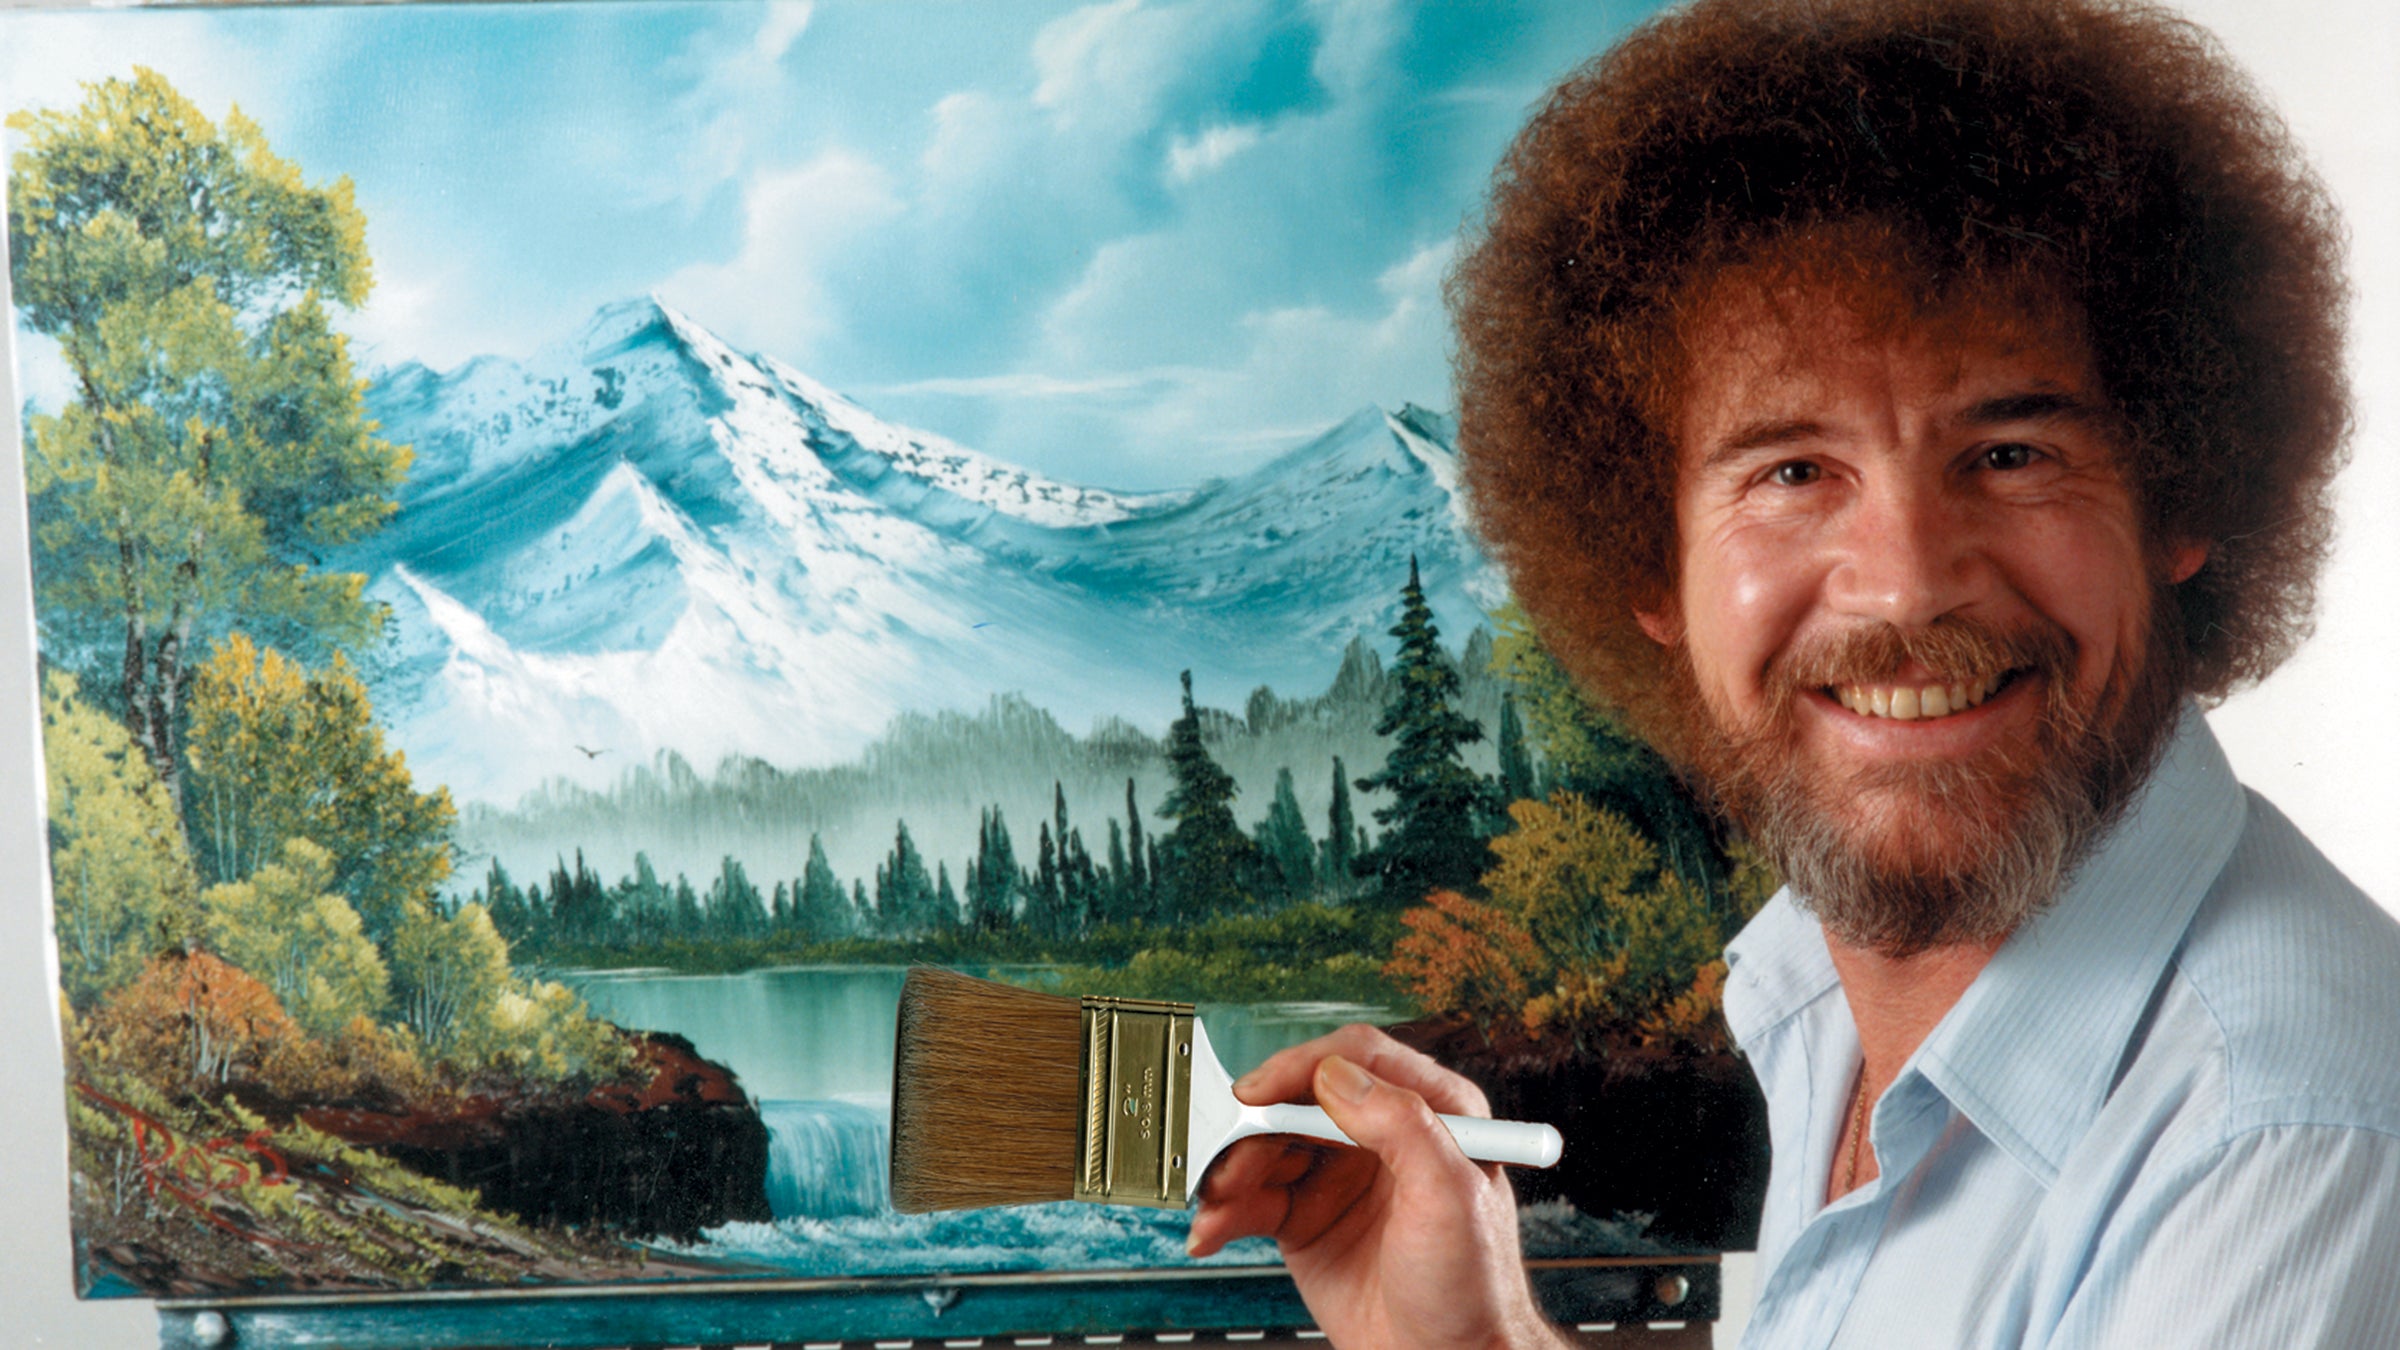 How Did Bob Ross Die? - The End of an Artistic Journey